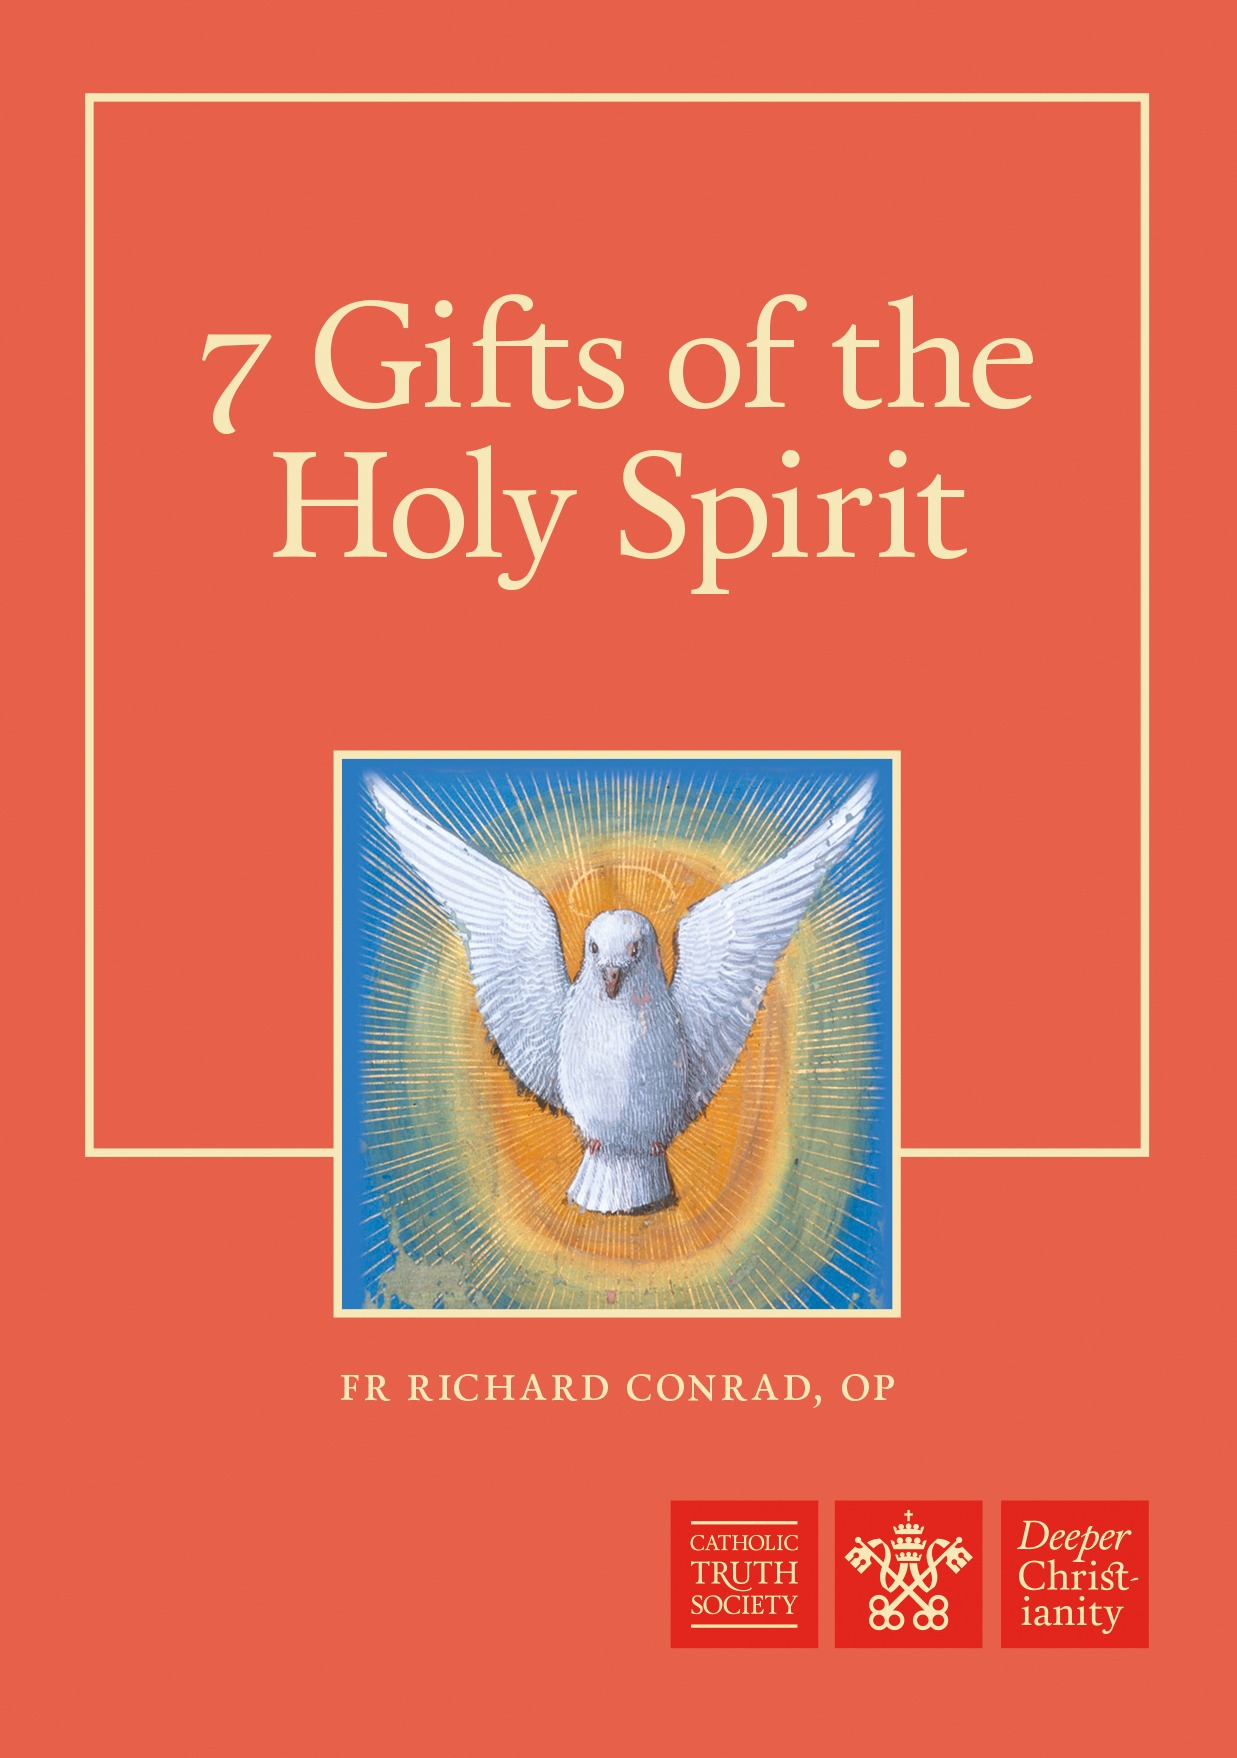 22-of-the-best-ideas-for-7-gifts-of-the-holy-spirit-for-kids-home